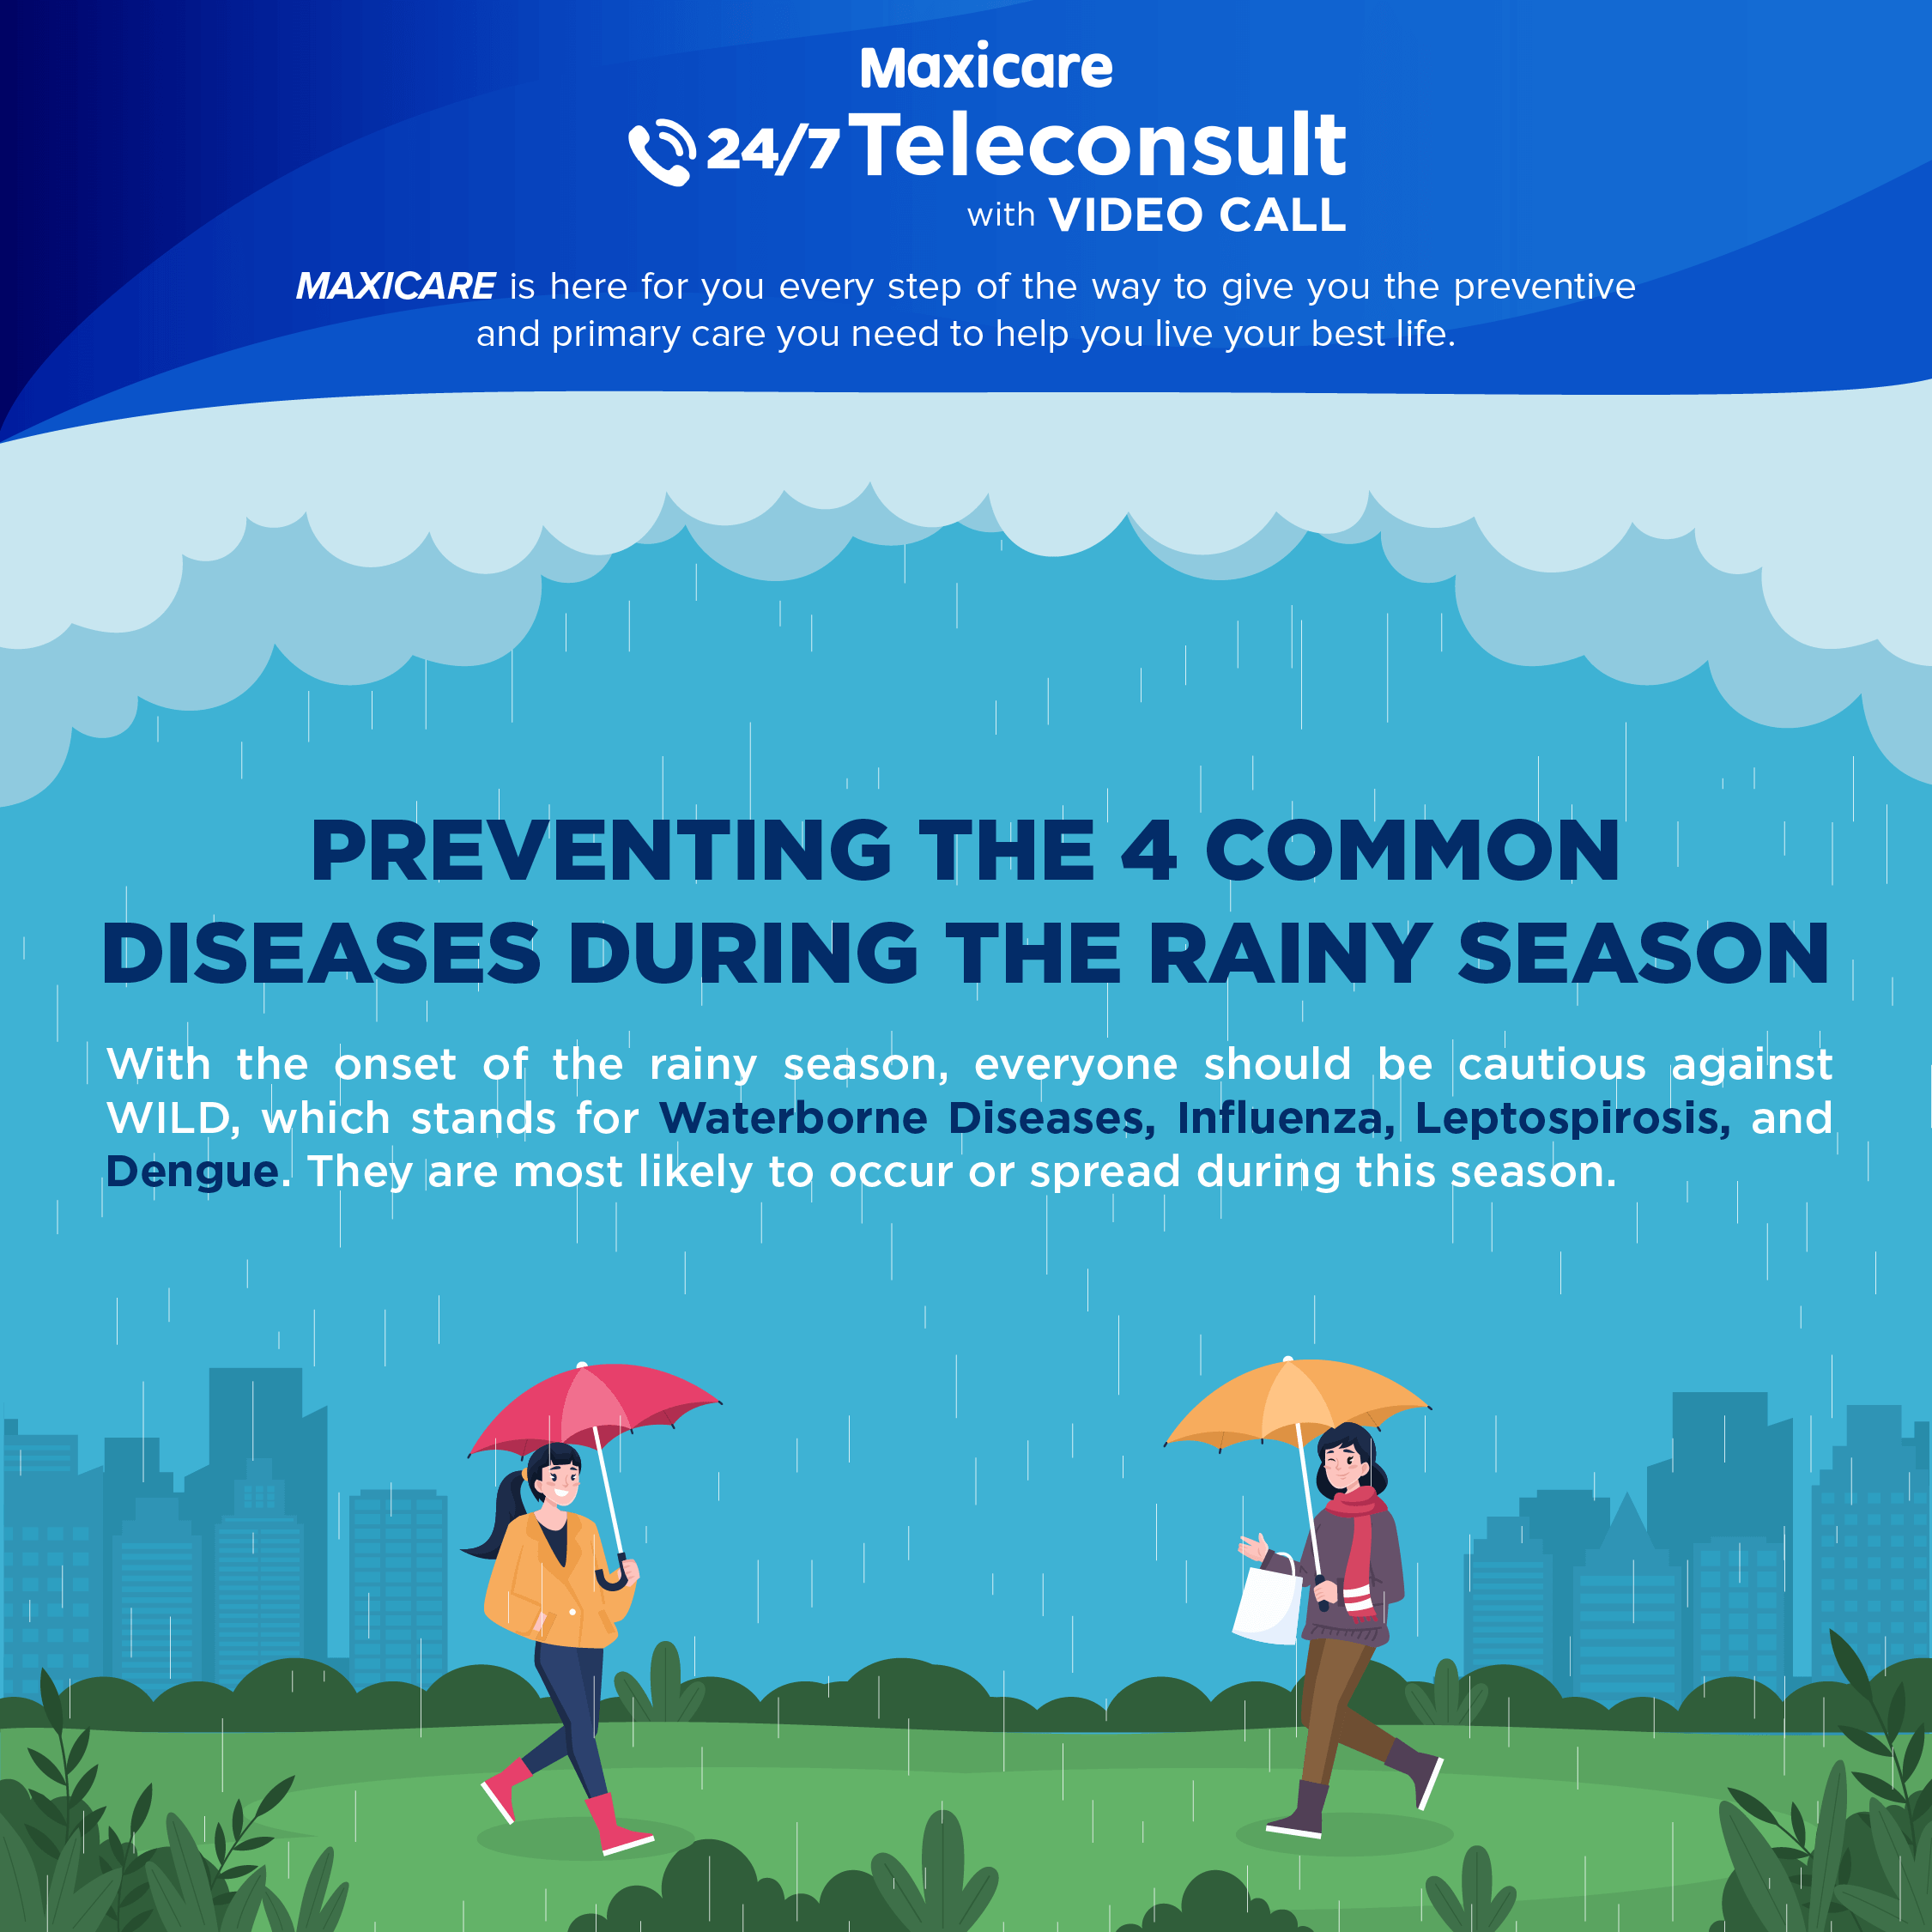 Preventing the four most common diseases during the rainy season